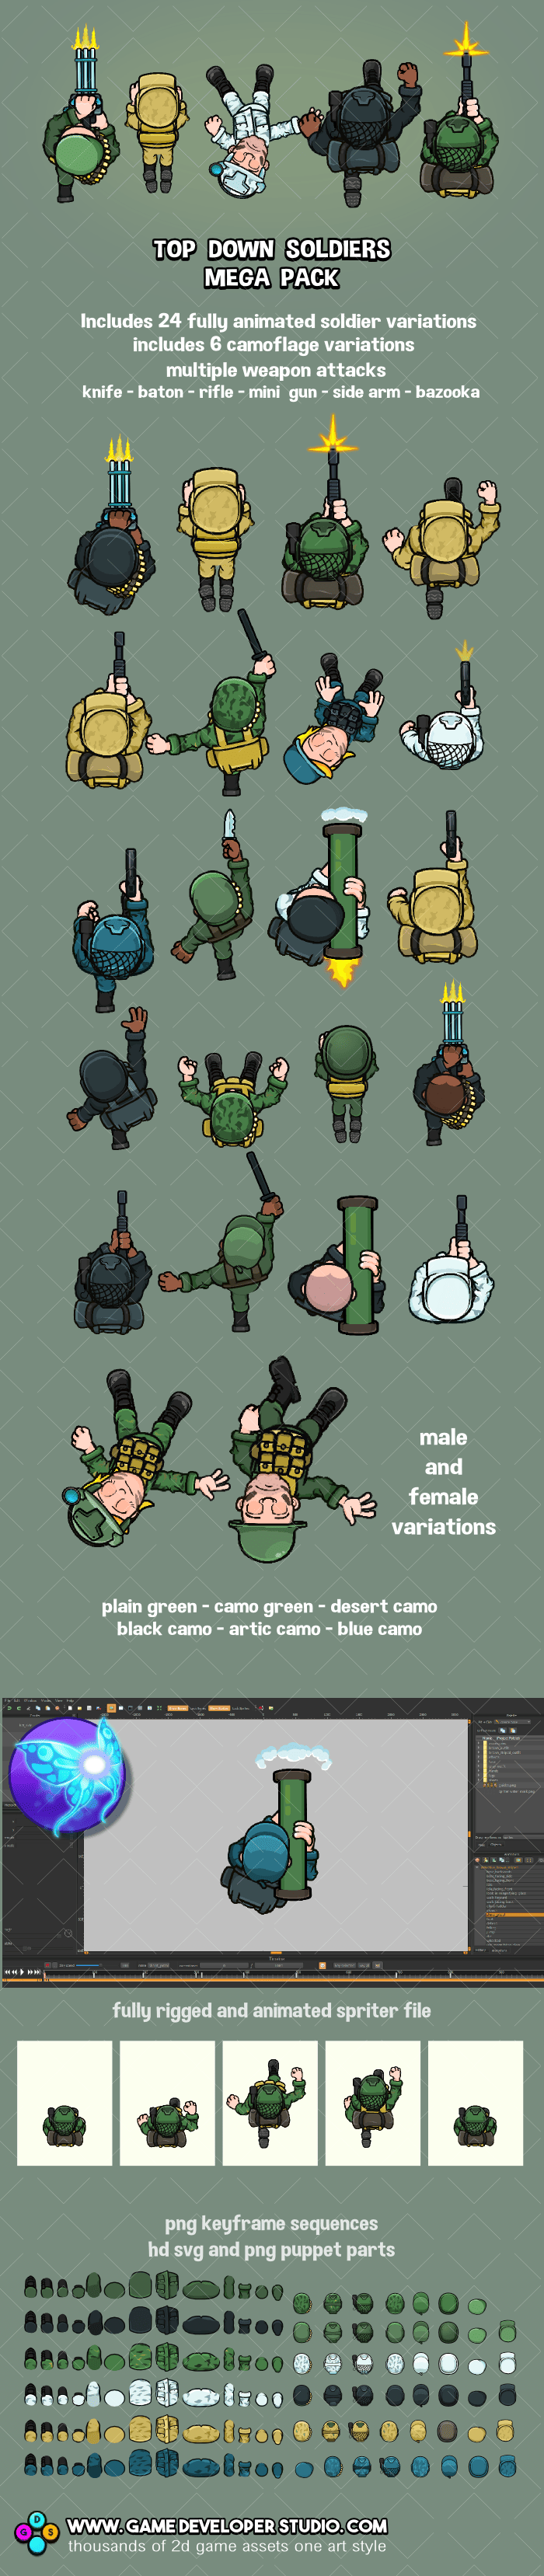 Top down animated soldiers game character pack